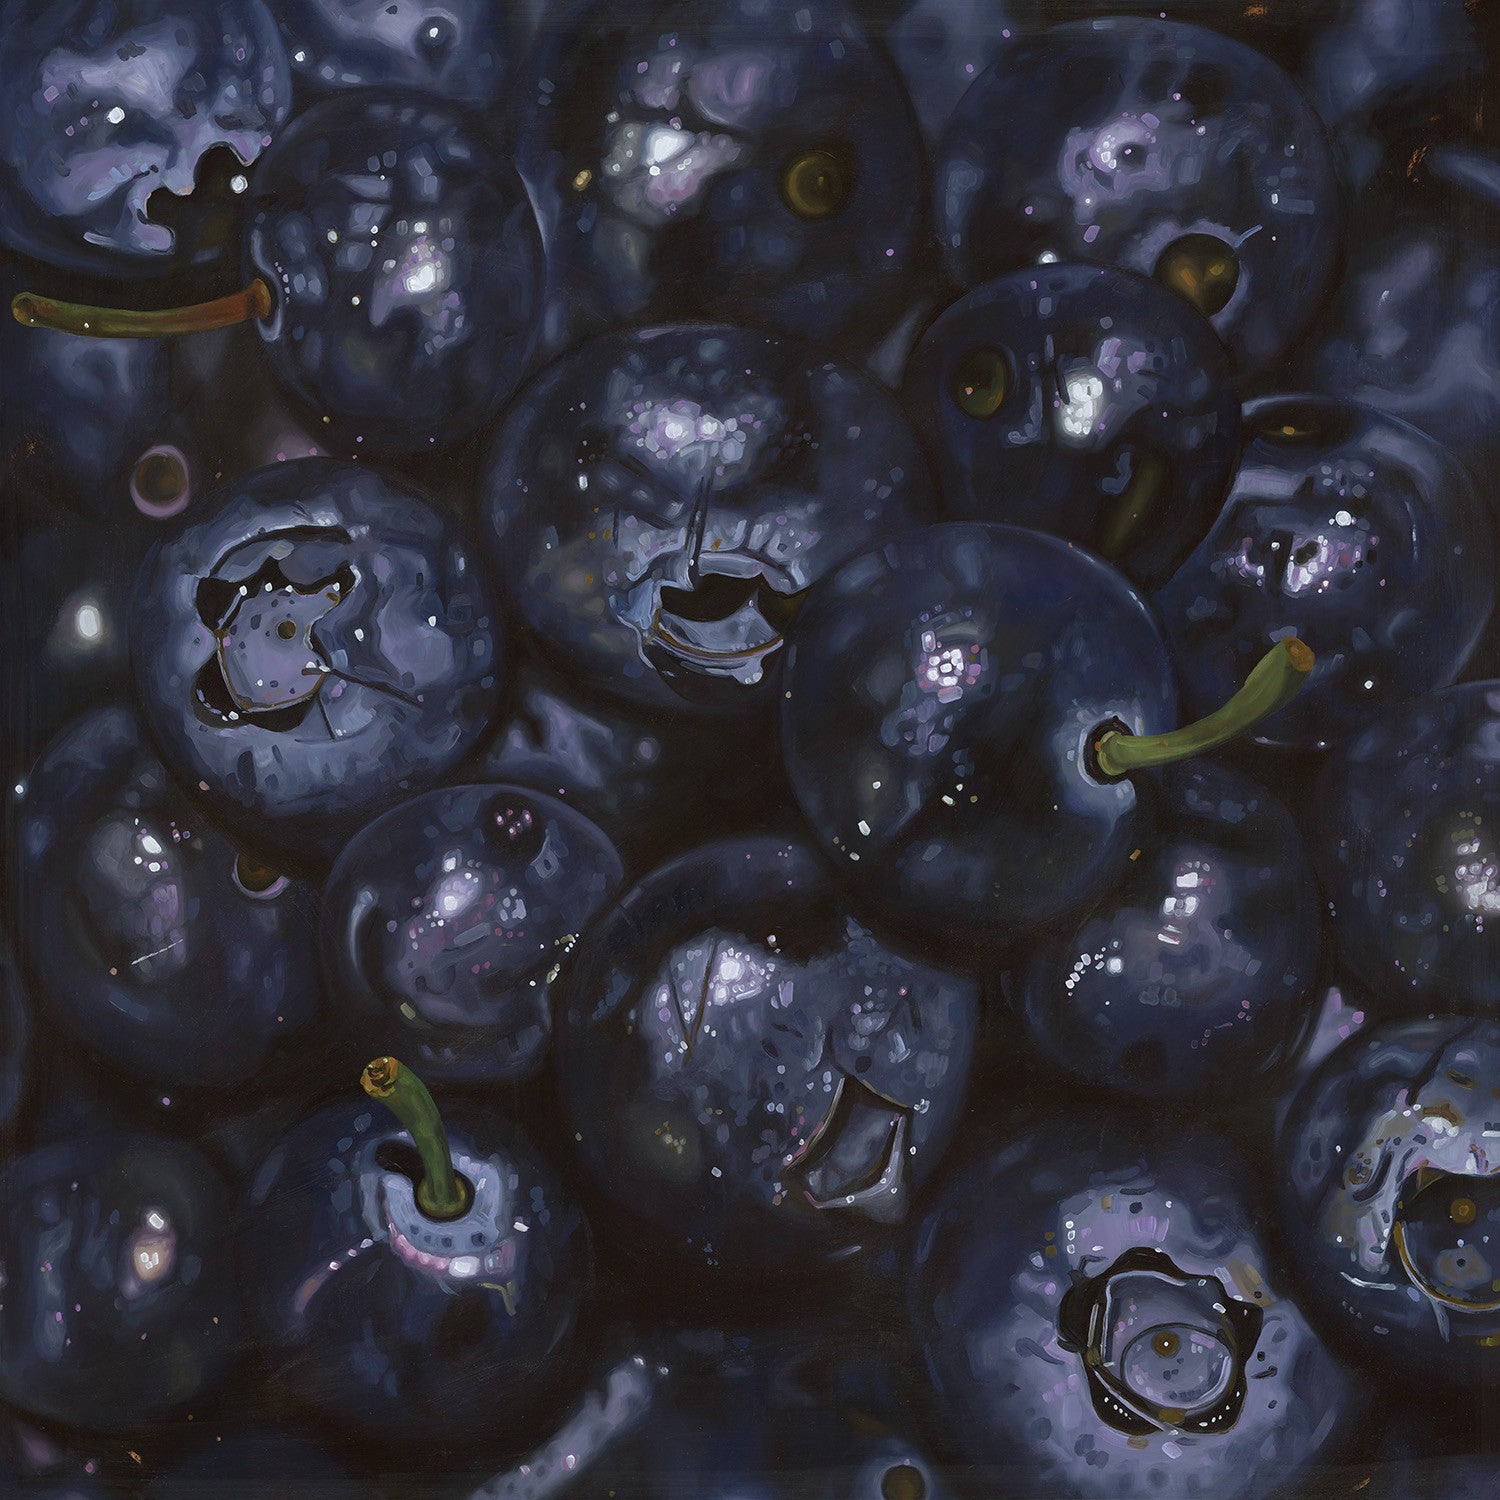 The original painting “Blueberries" by Hannah Kilby from Hannah Michelle Studios.